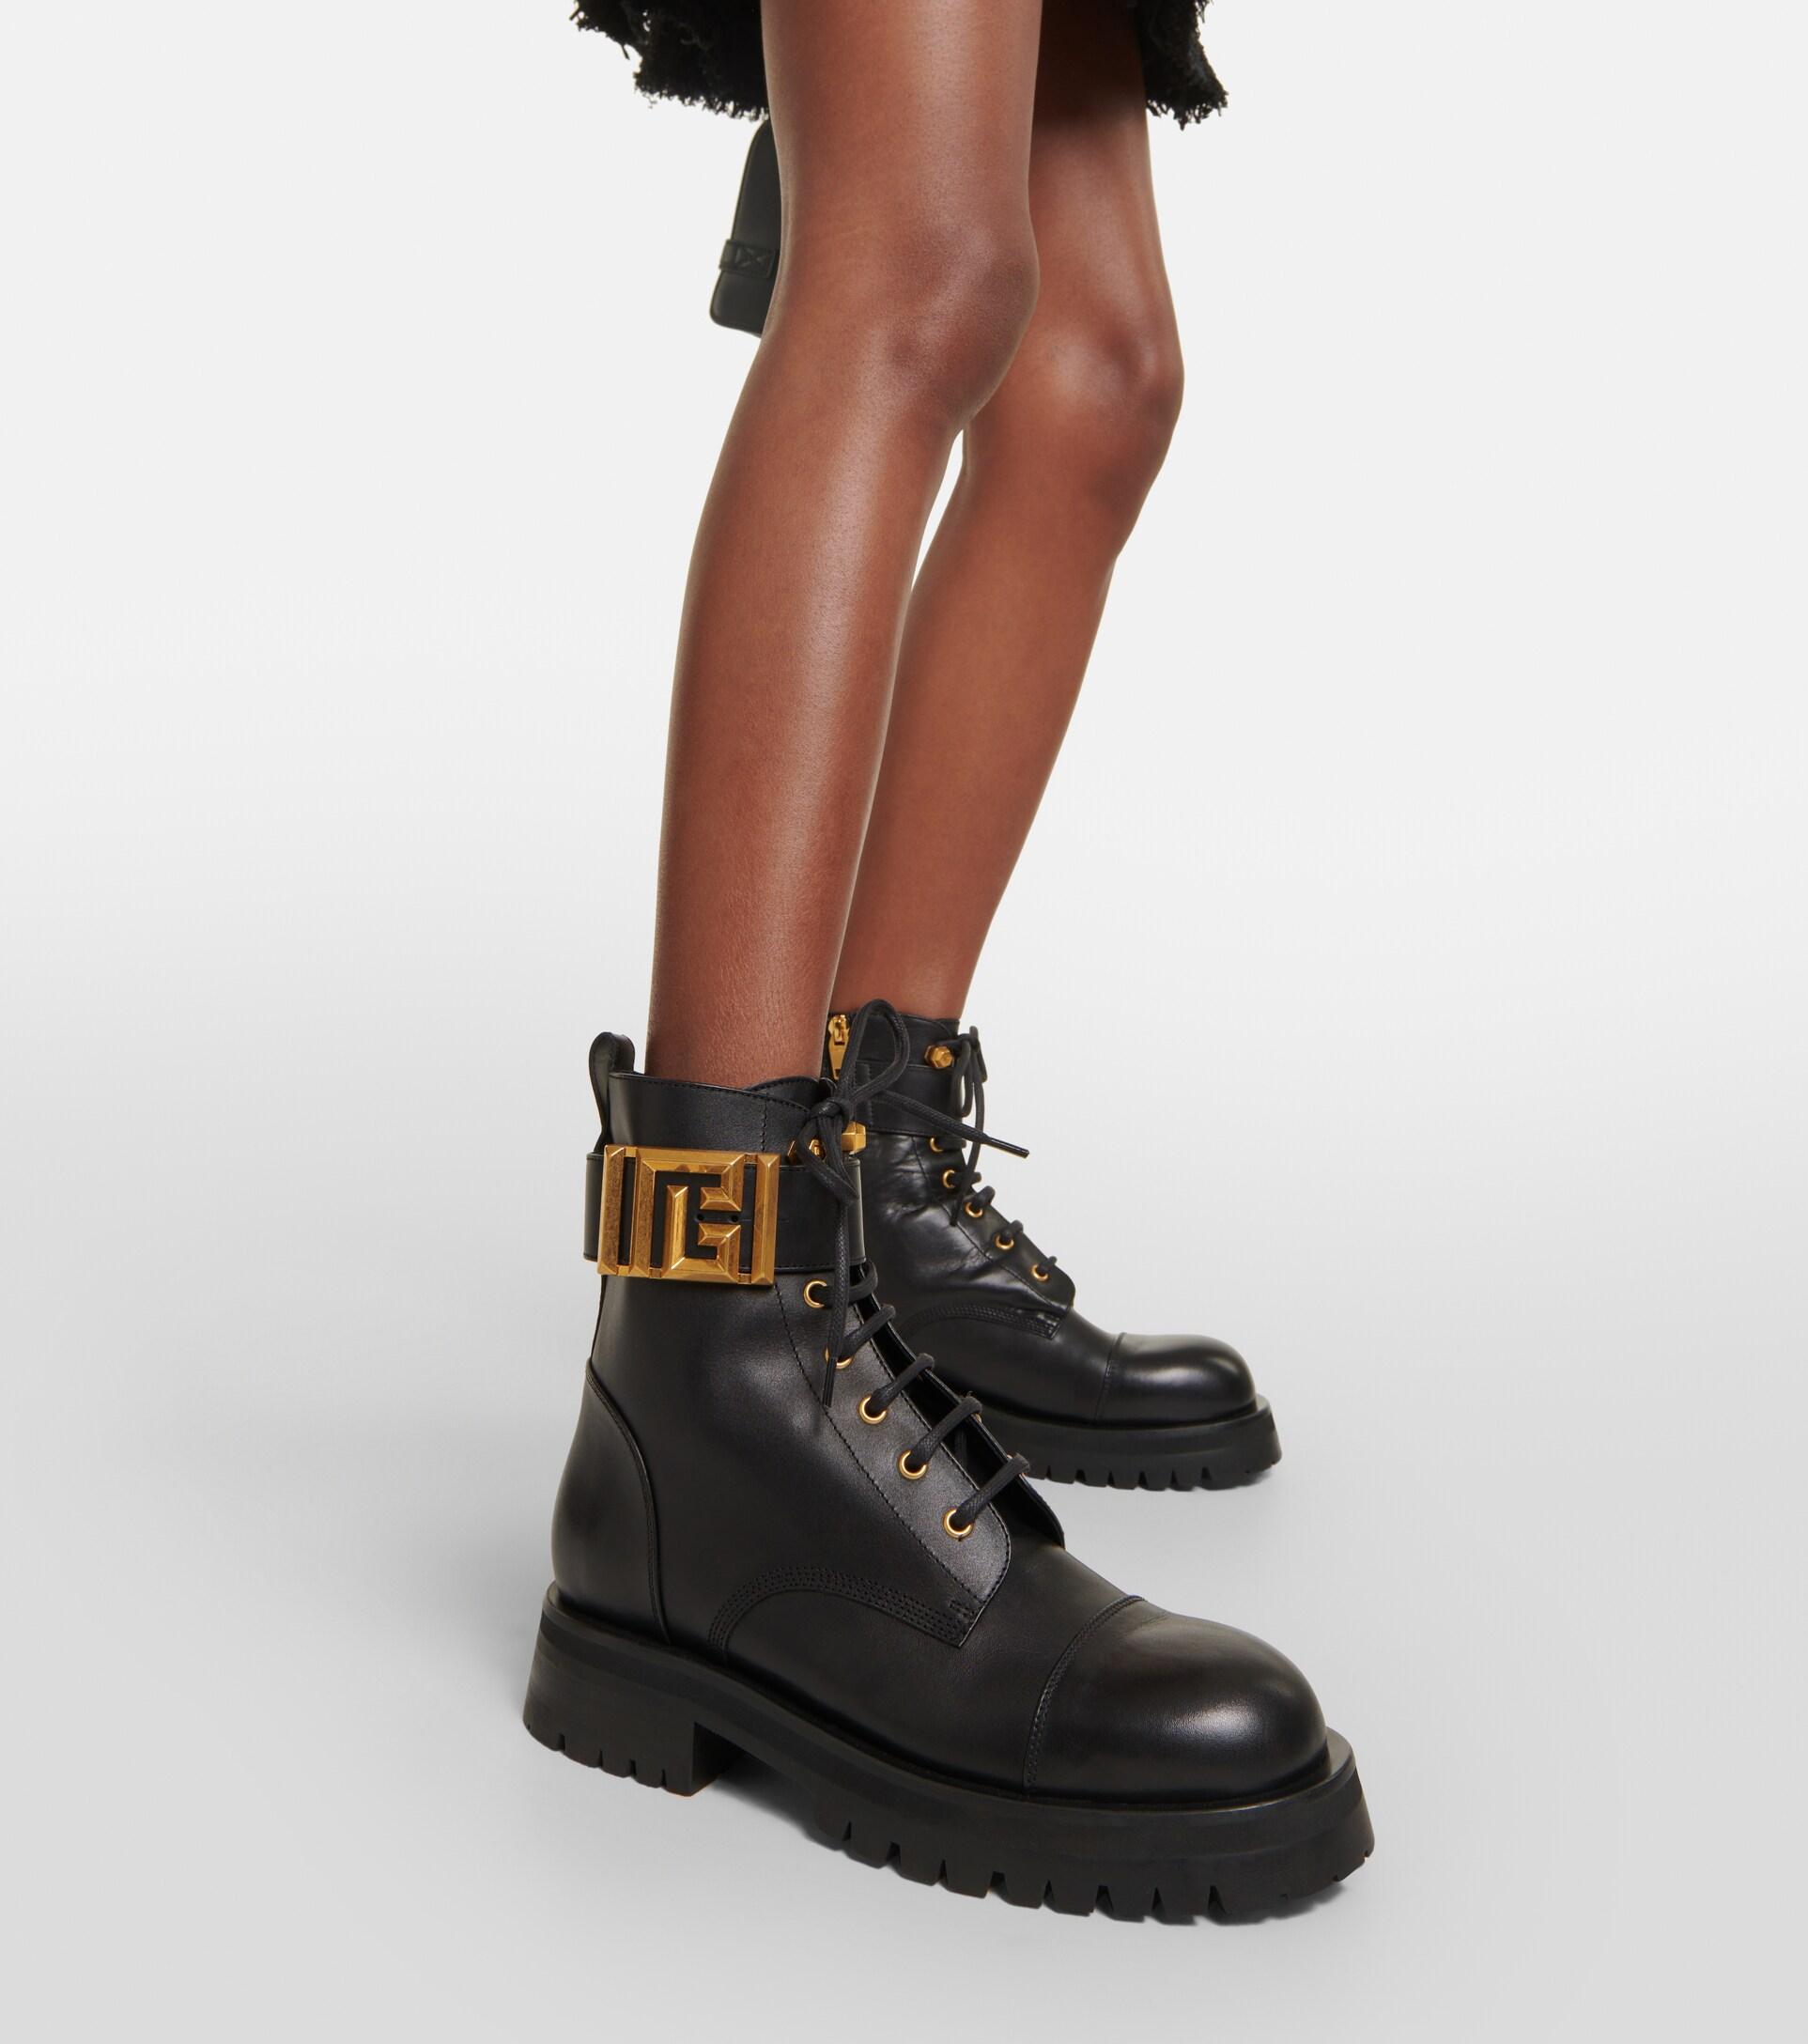 Balmain Romy Leather Lace-up Boots in Black | Lyst